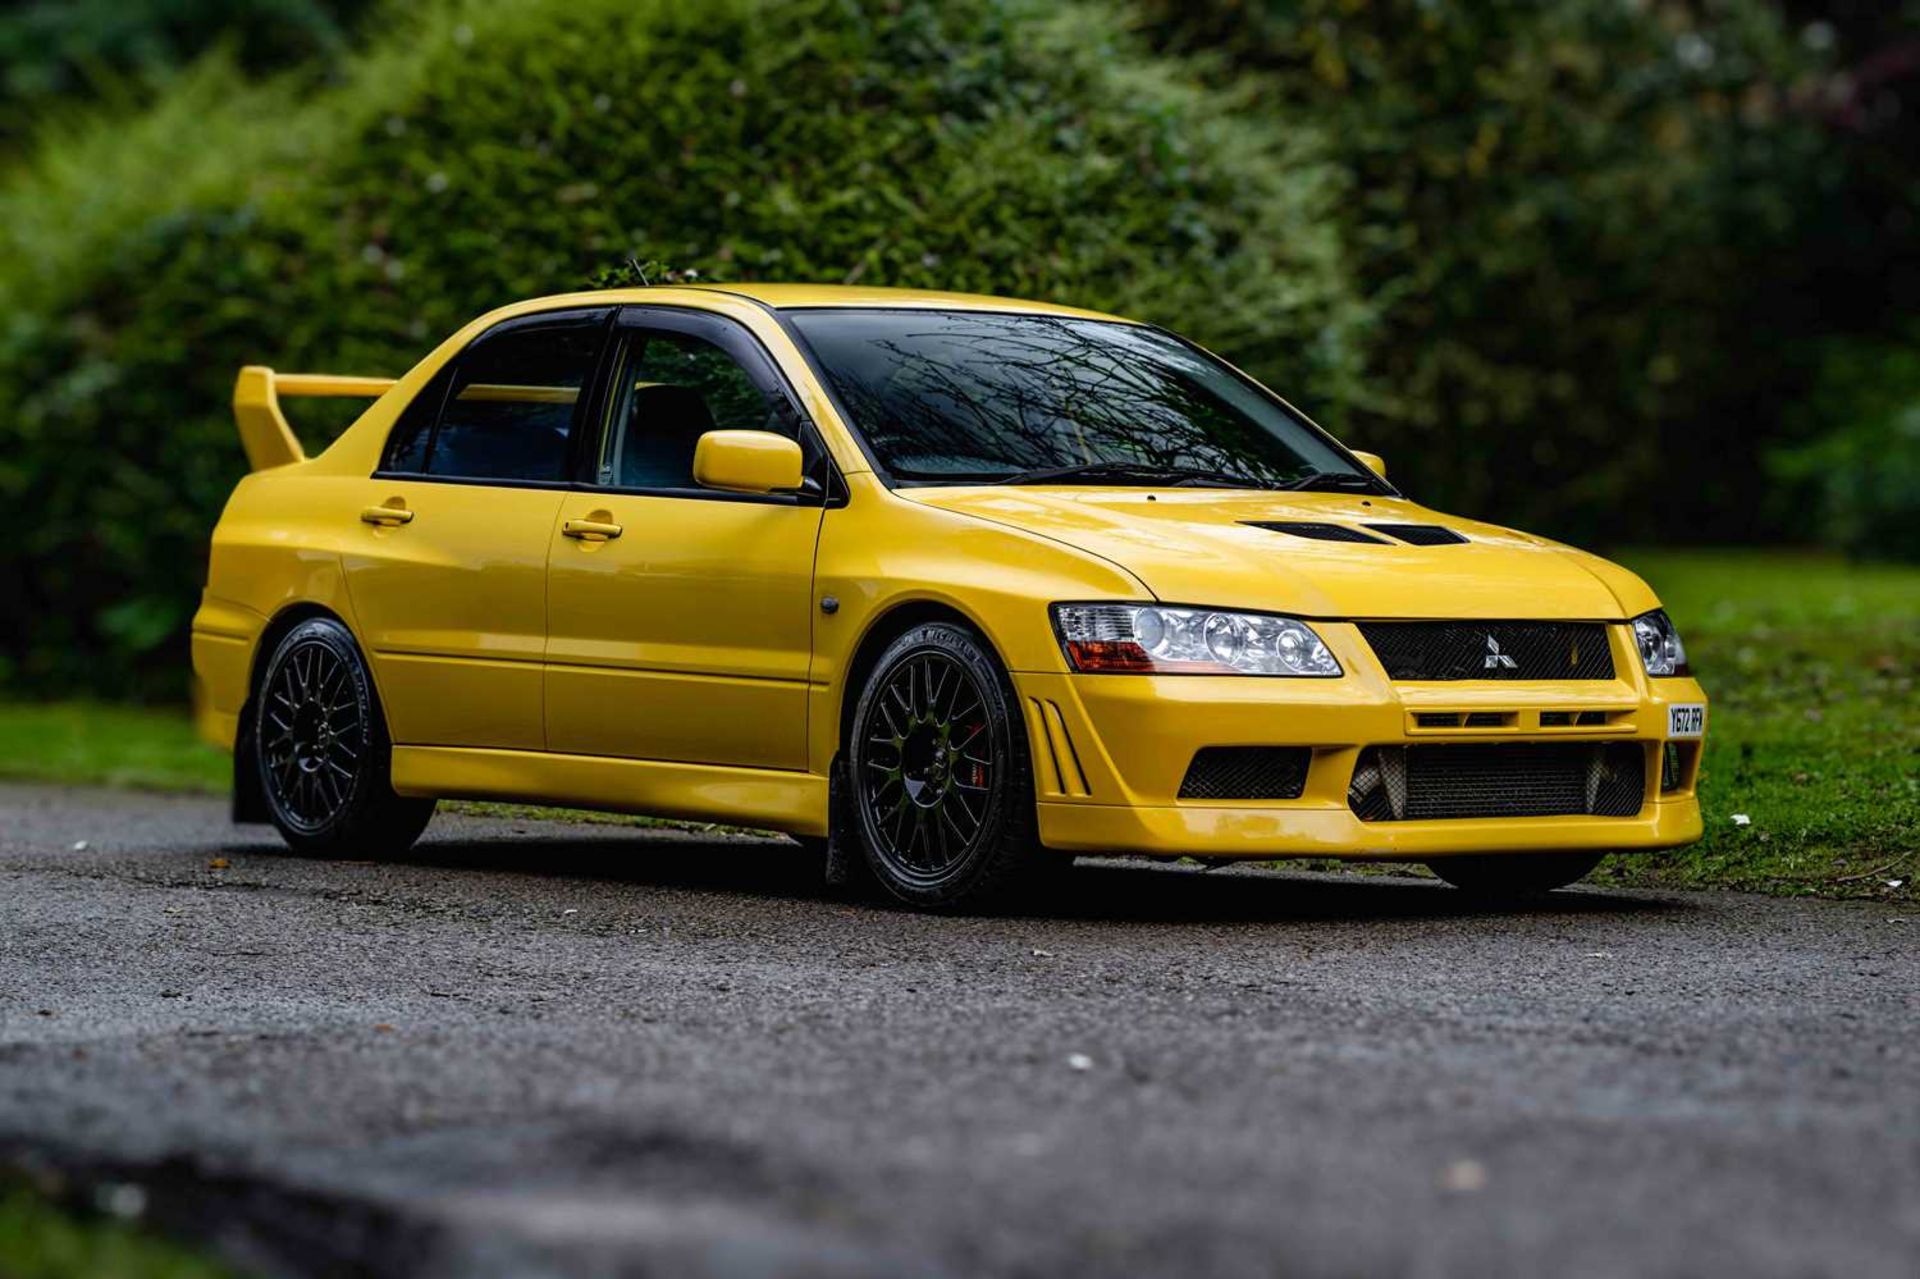 2001 Mitsubishi Lancer Evolution VII Subtly upgraded and previous long-term (seventeen year) ownersh